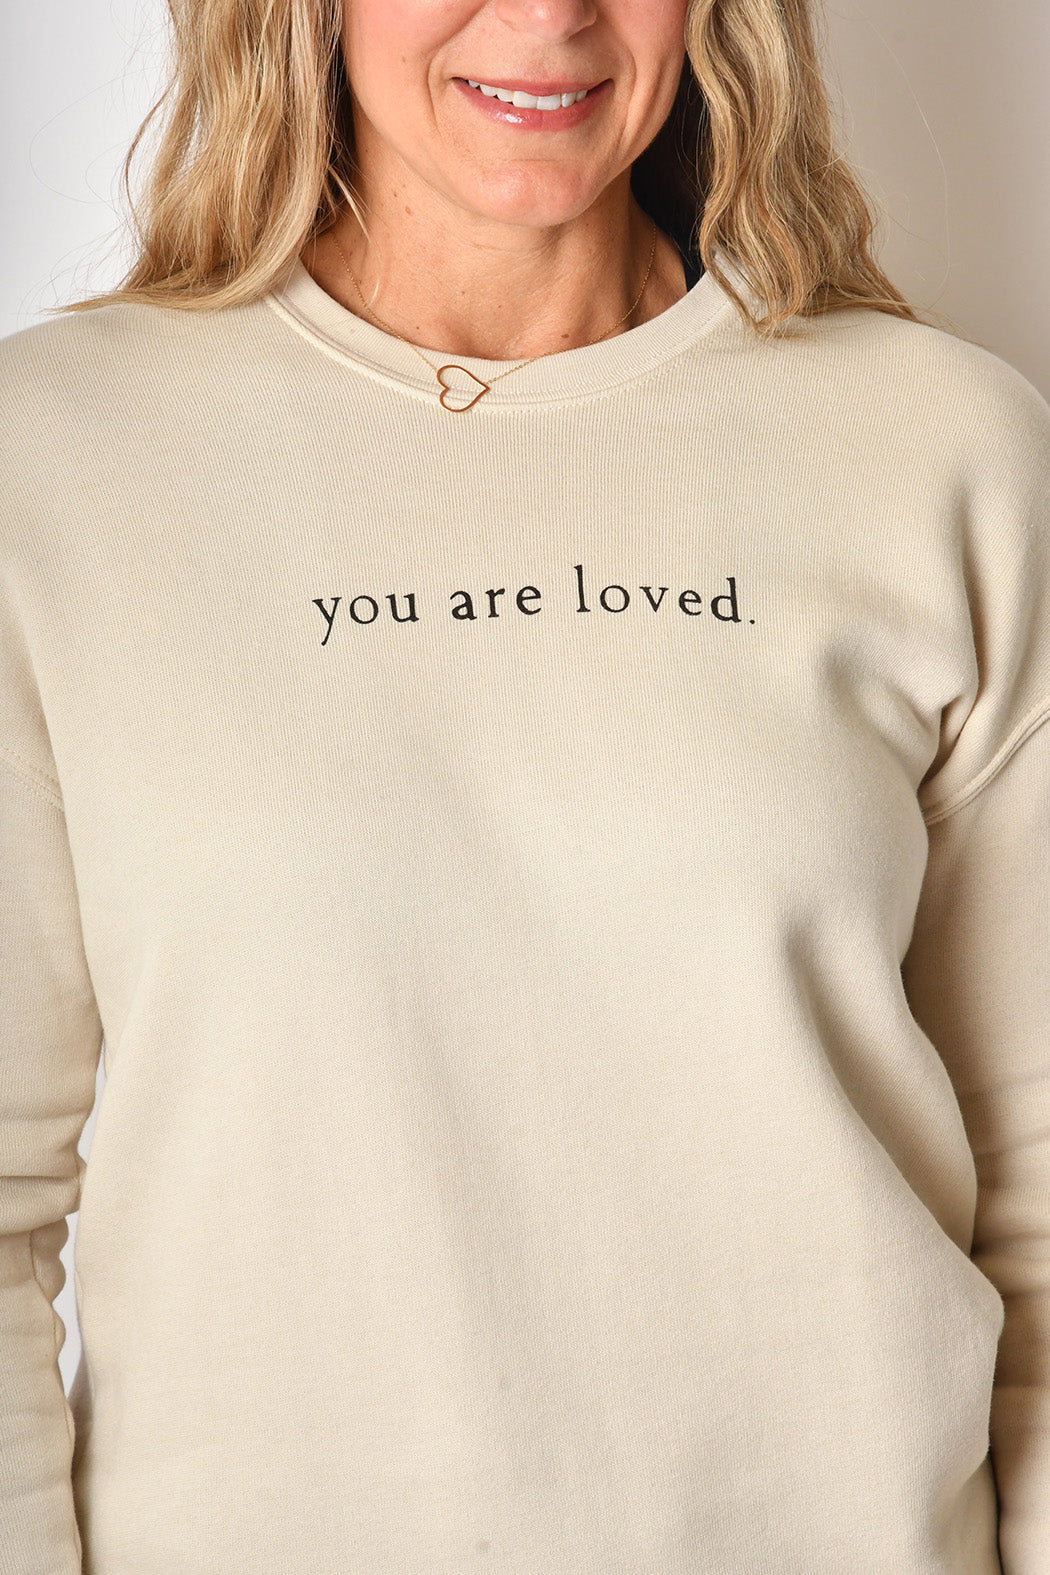 YOU ARE LOVED SWEATSHIRT 2 colors